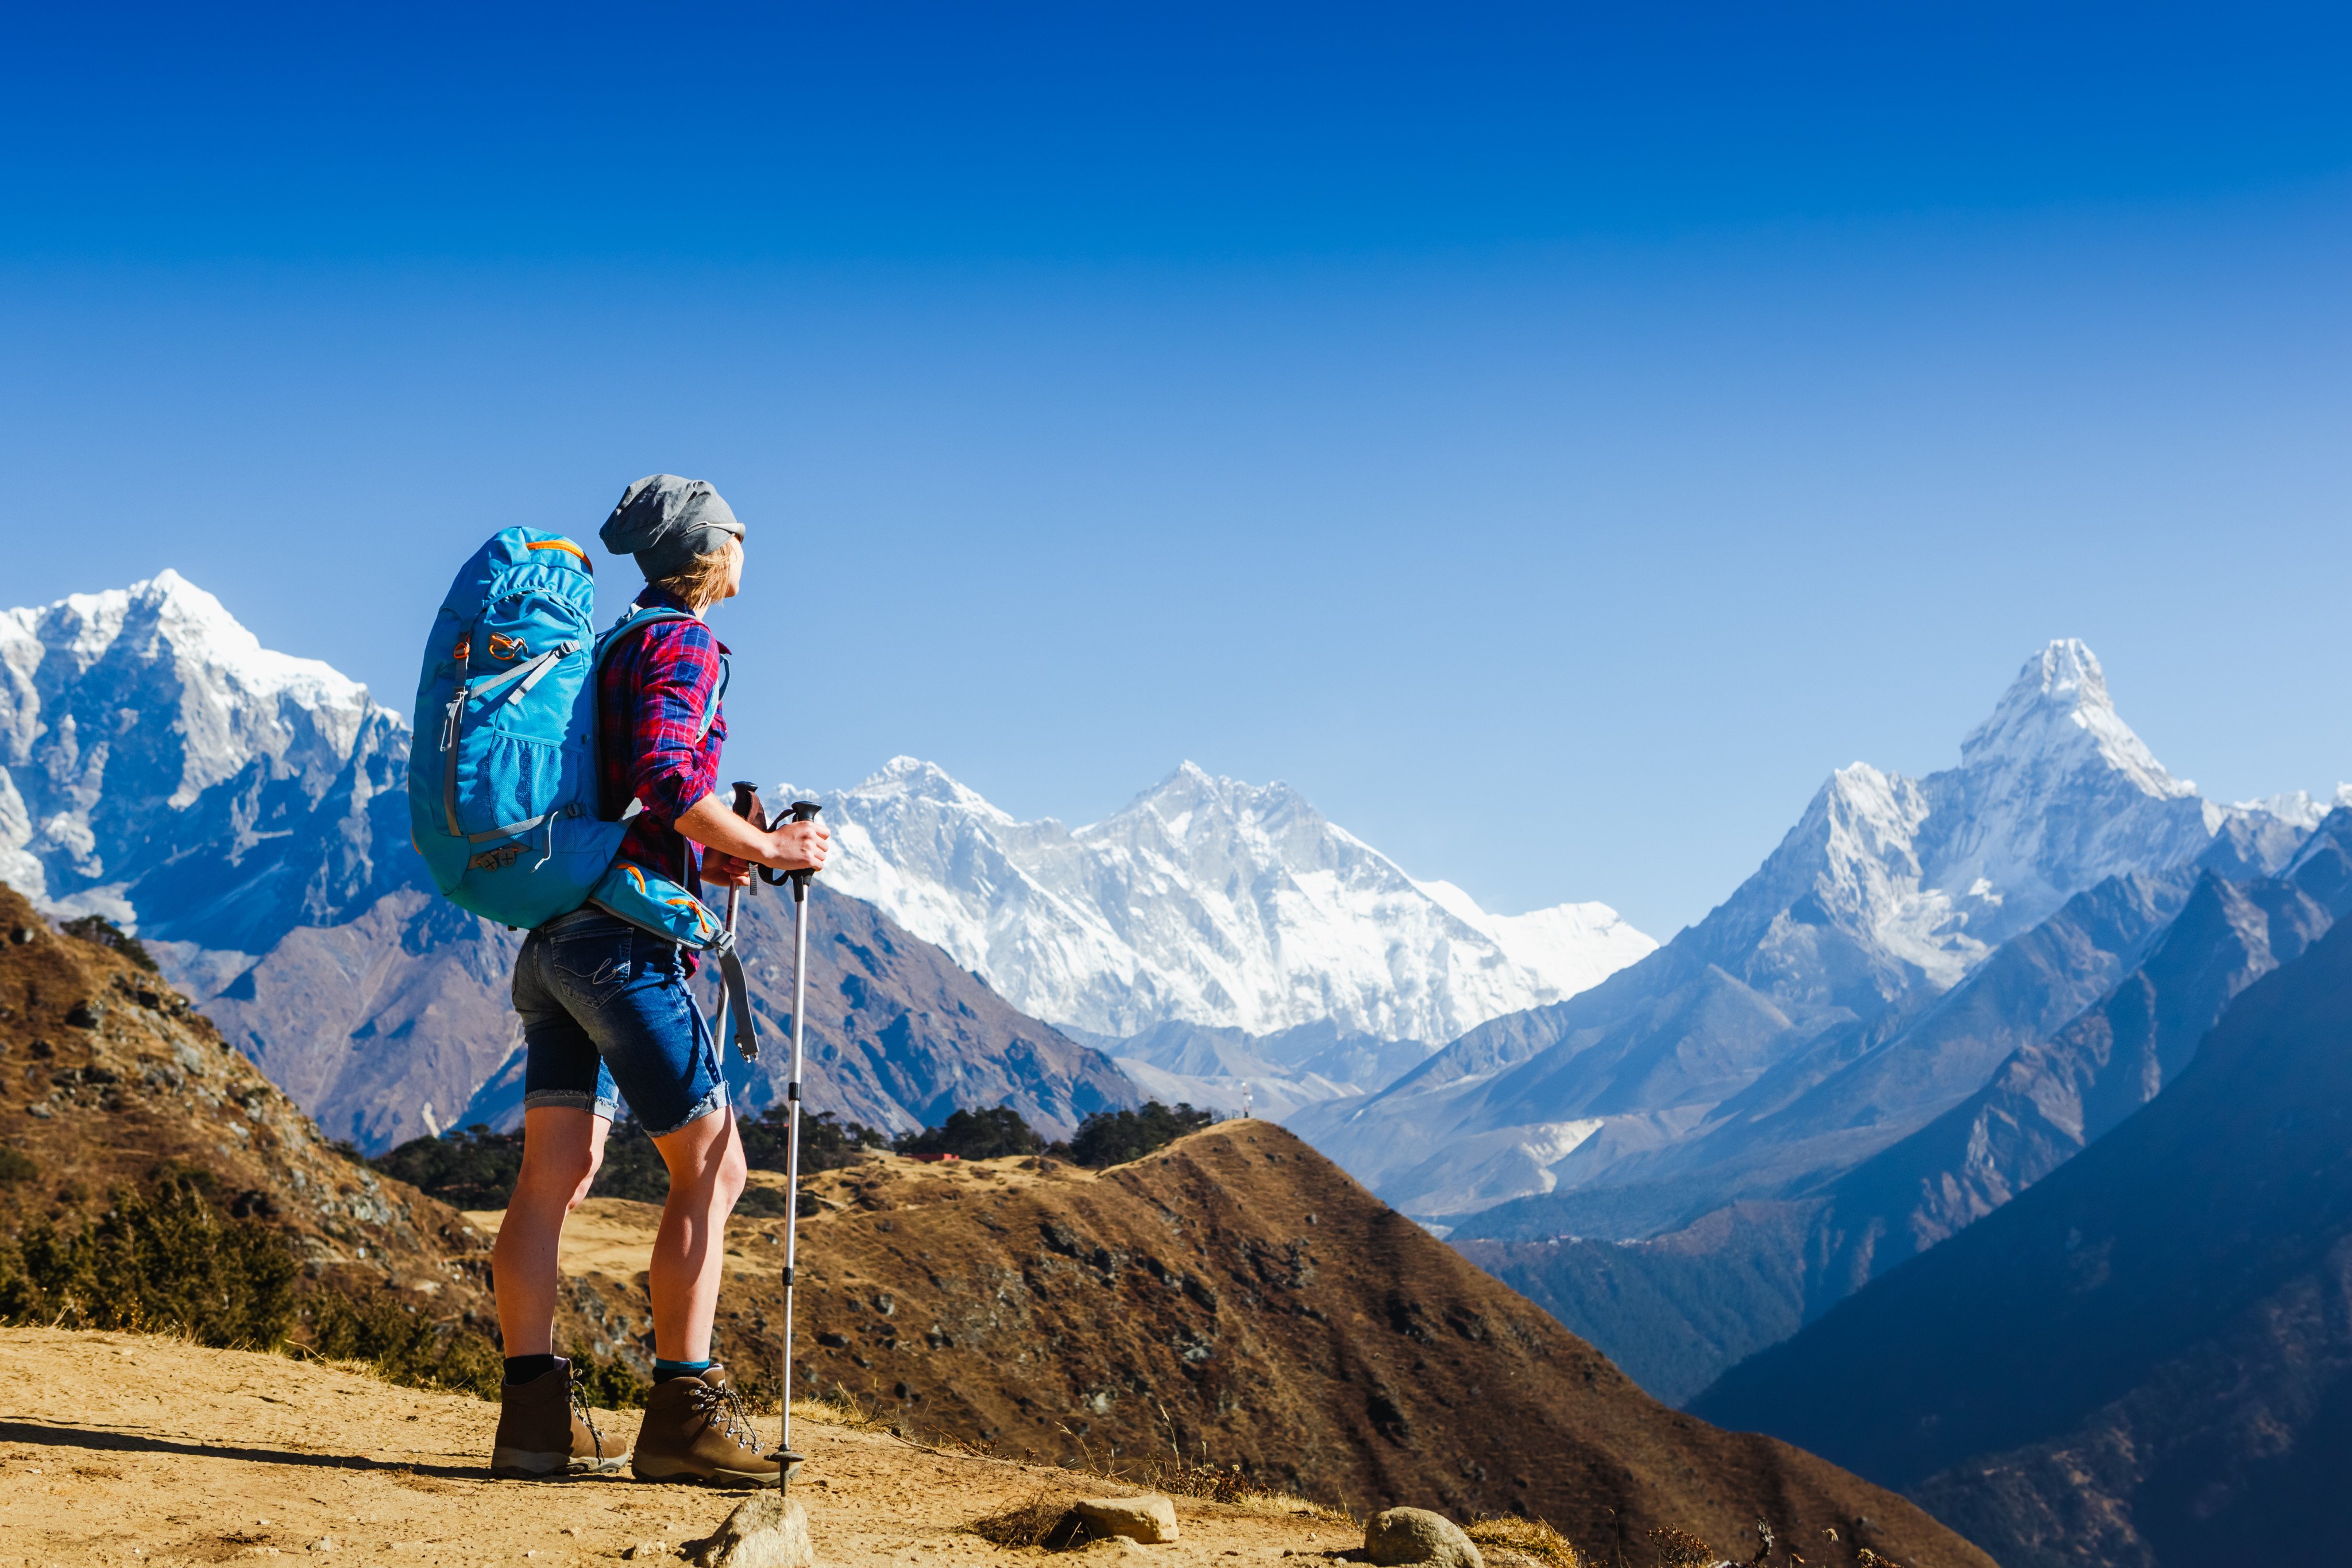 Nepal is home to some of the finest trekking in the world. Photo: Shutterstock Images